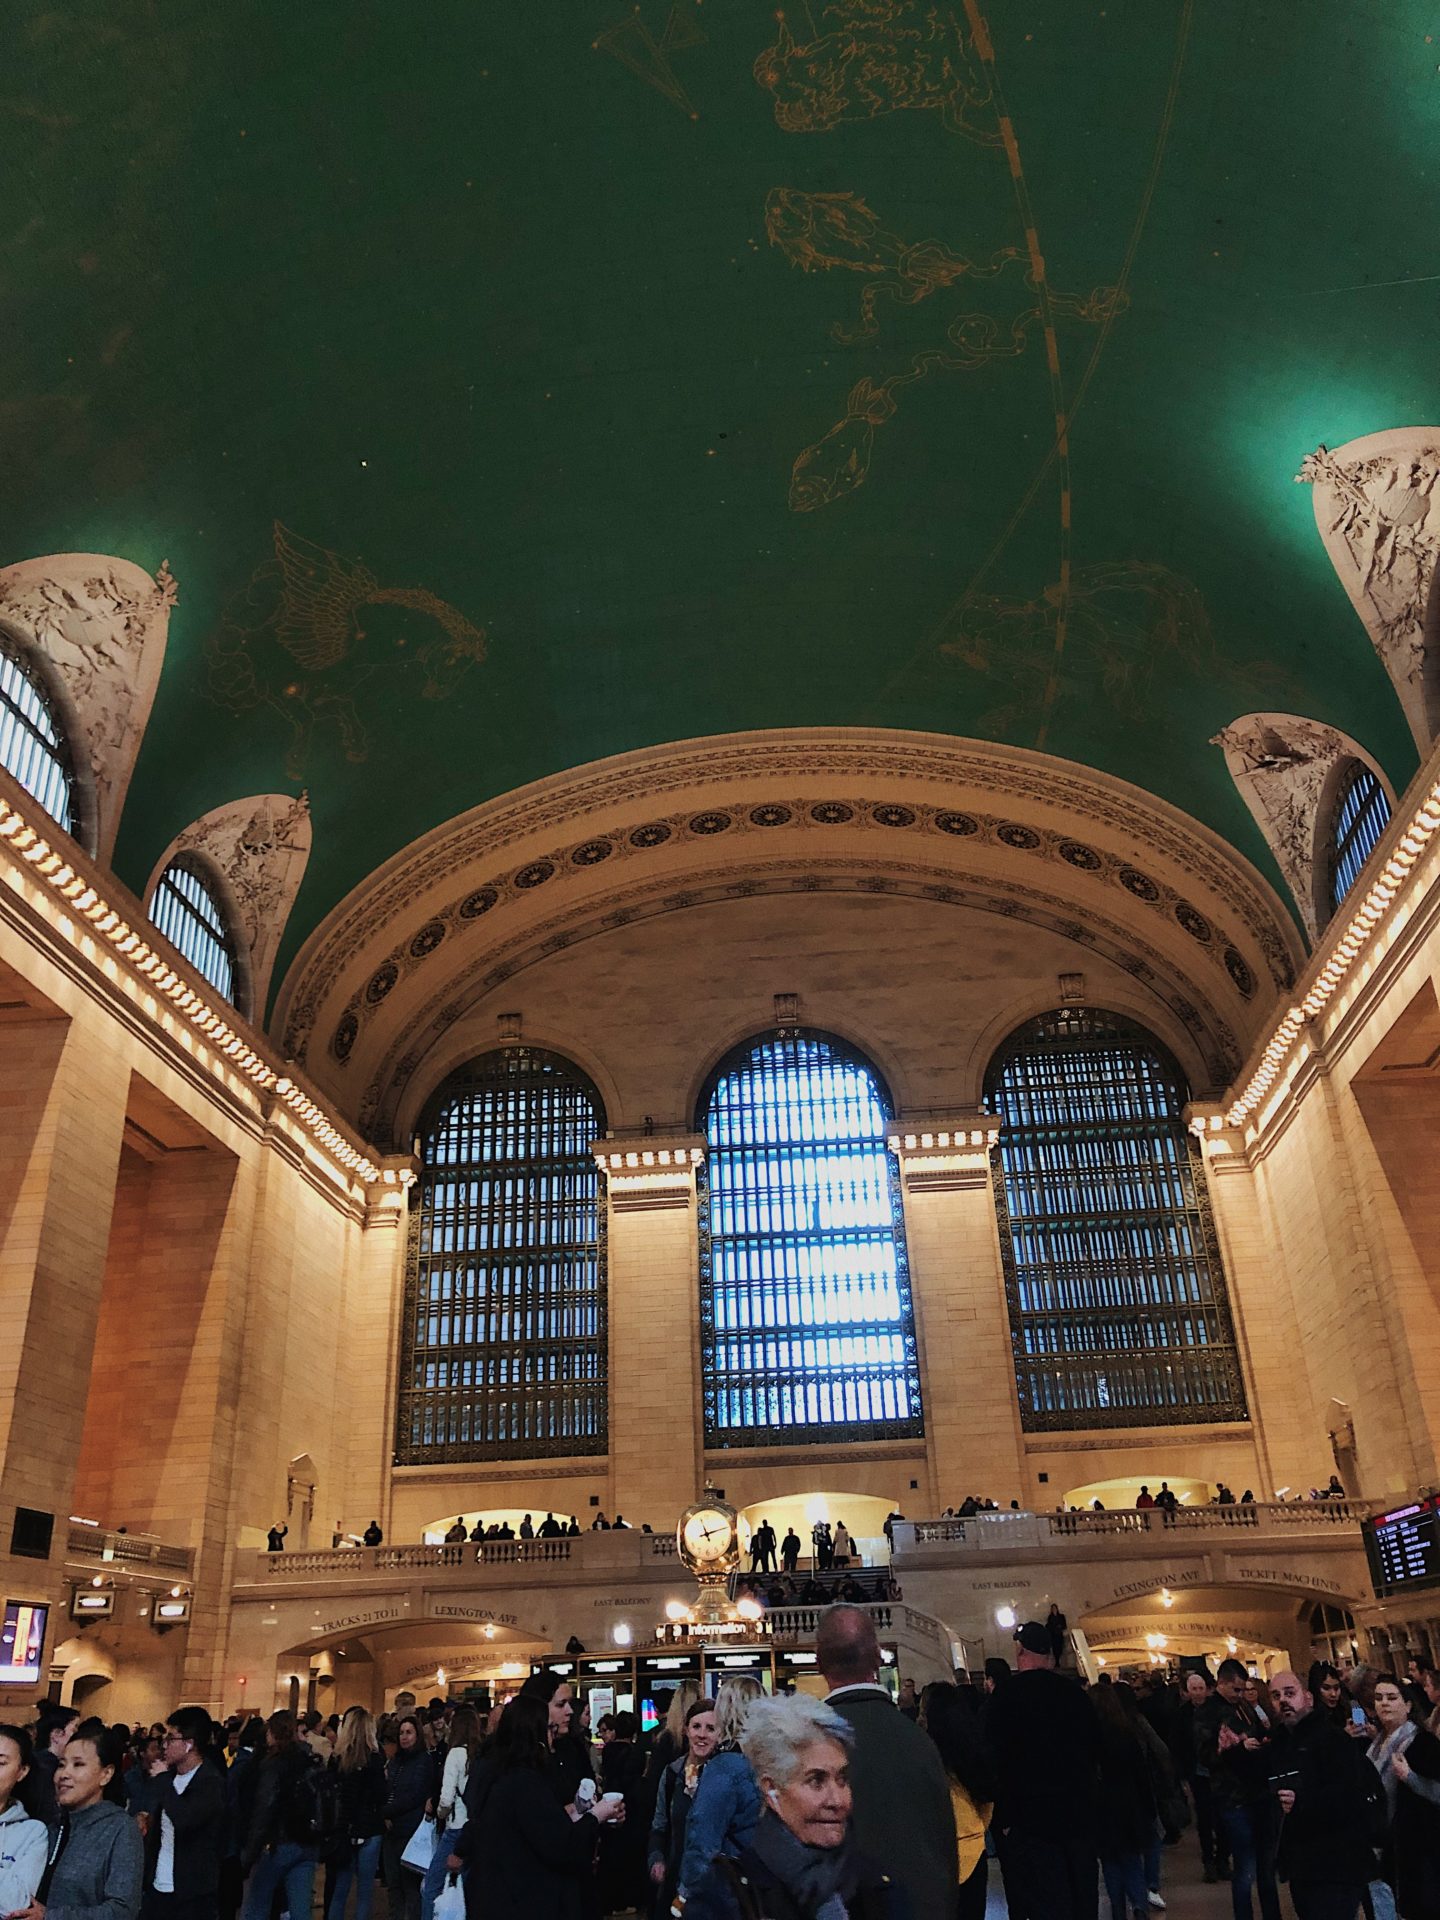 The inside of Grand Central Station in New York City